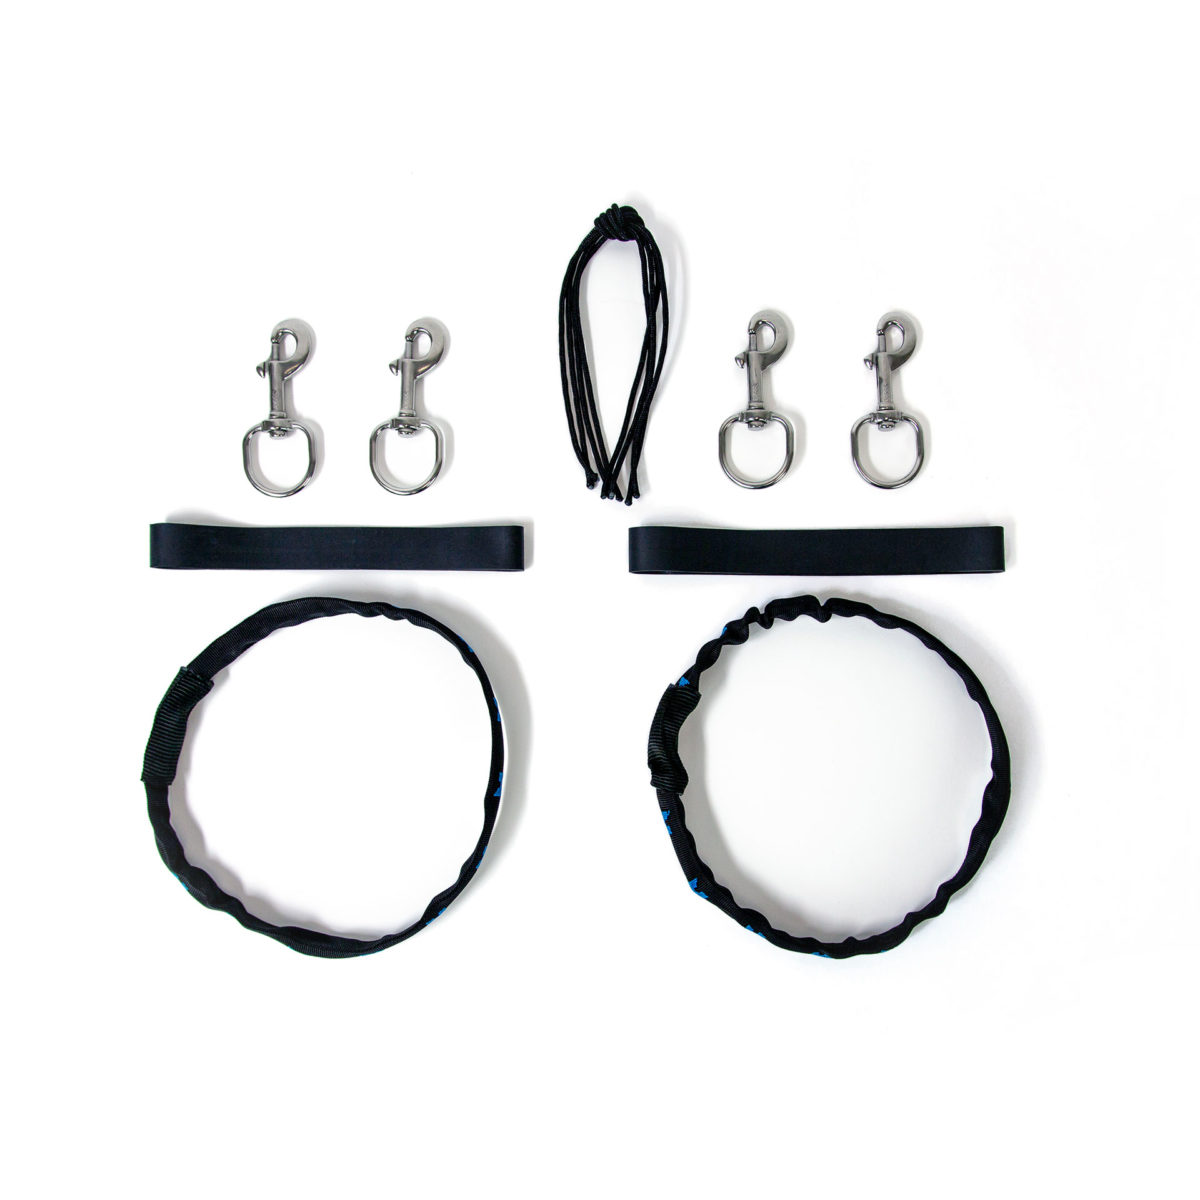 SM rigging kit includes 2 cylinder bands with nylon cover and two 1 inch bolt snaps